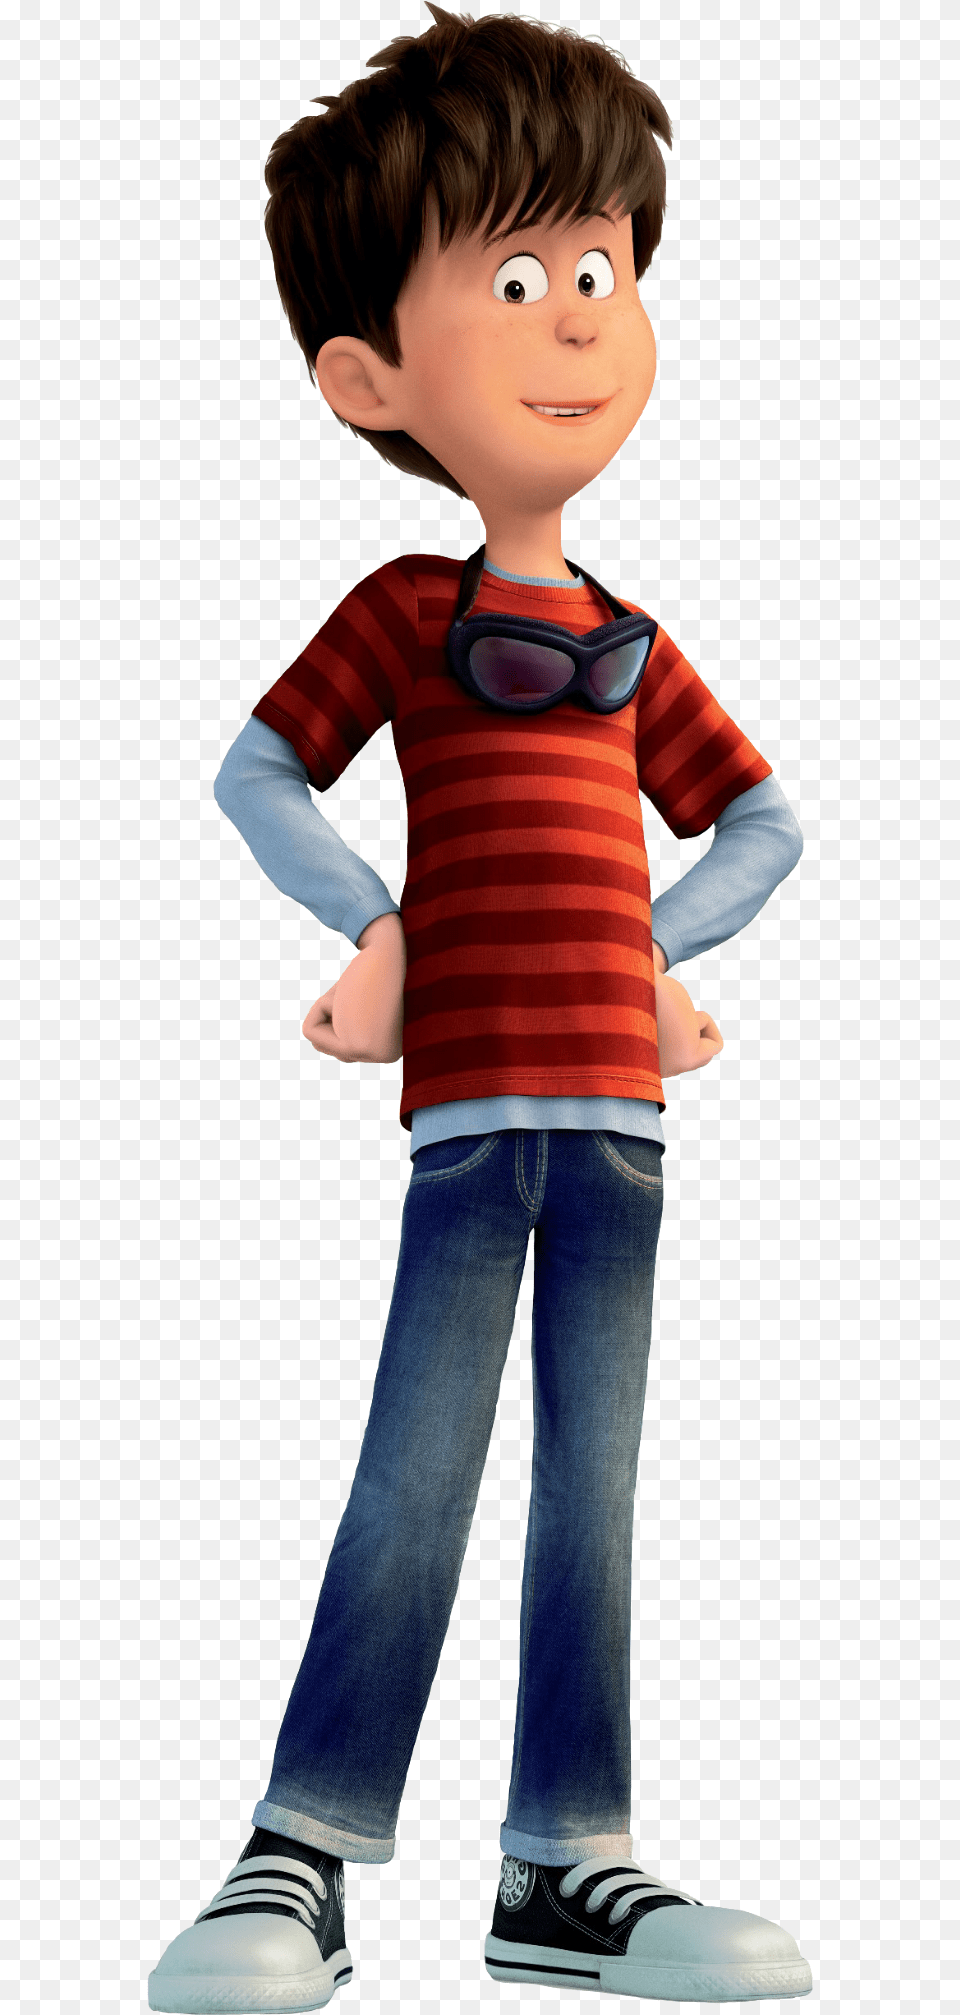 Carl Fredricksen Main Character From Lorax, Boy, Person, Child, Clothing Png